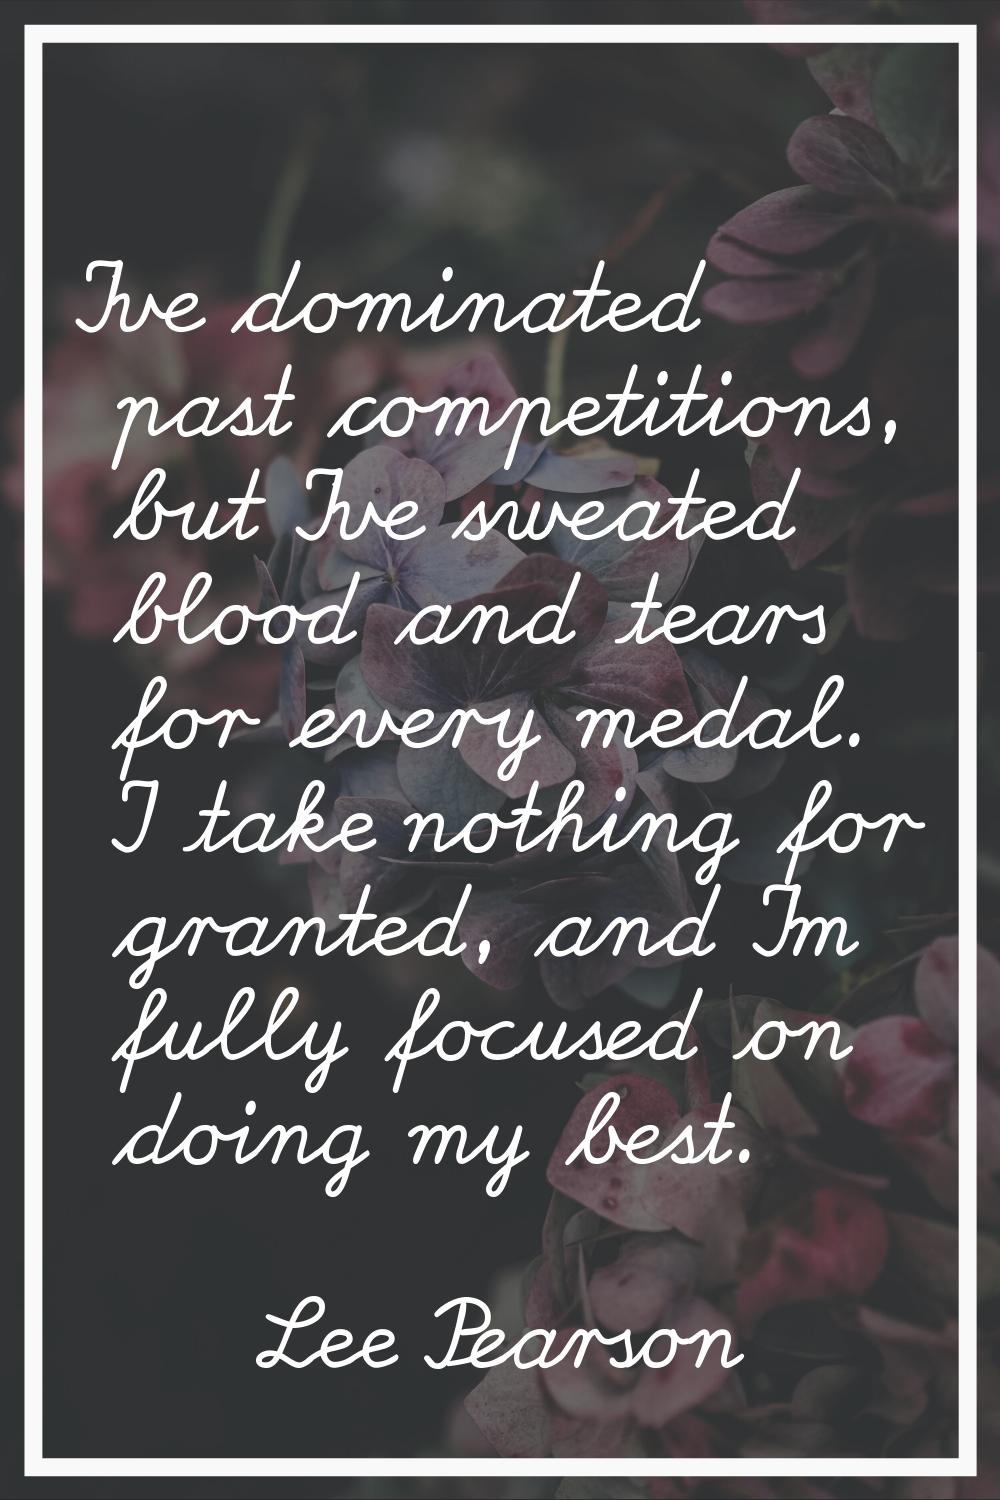 I've dominated past competitions, but I've sweated blood and tears for every medal. I take nothing 